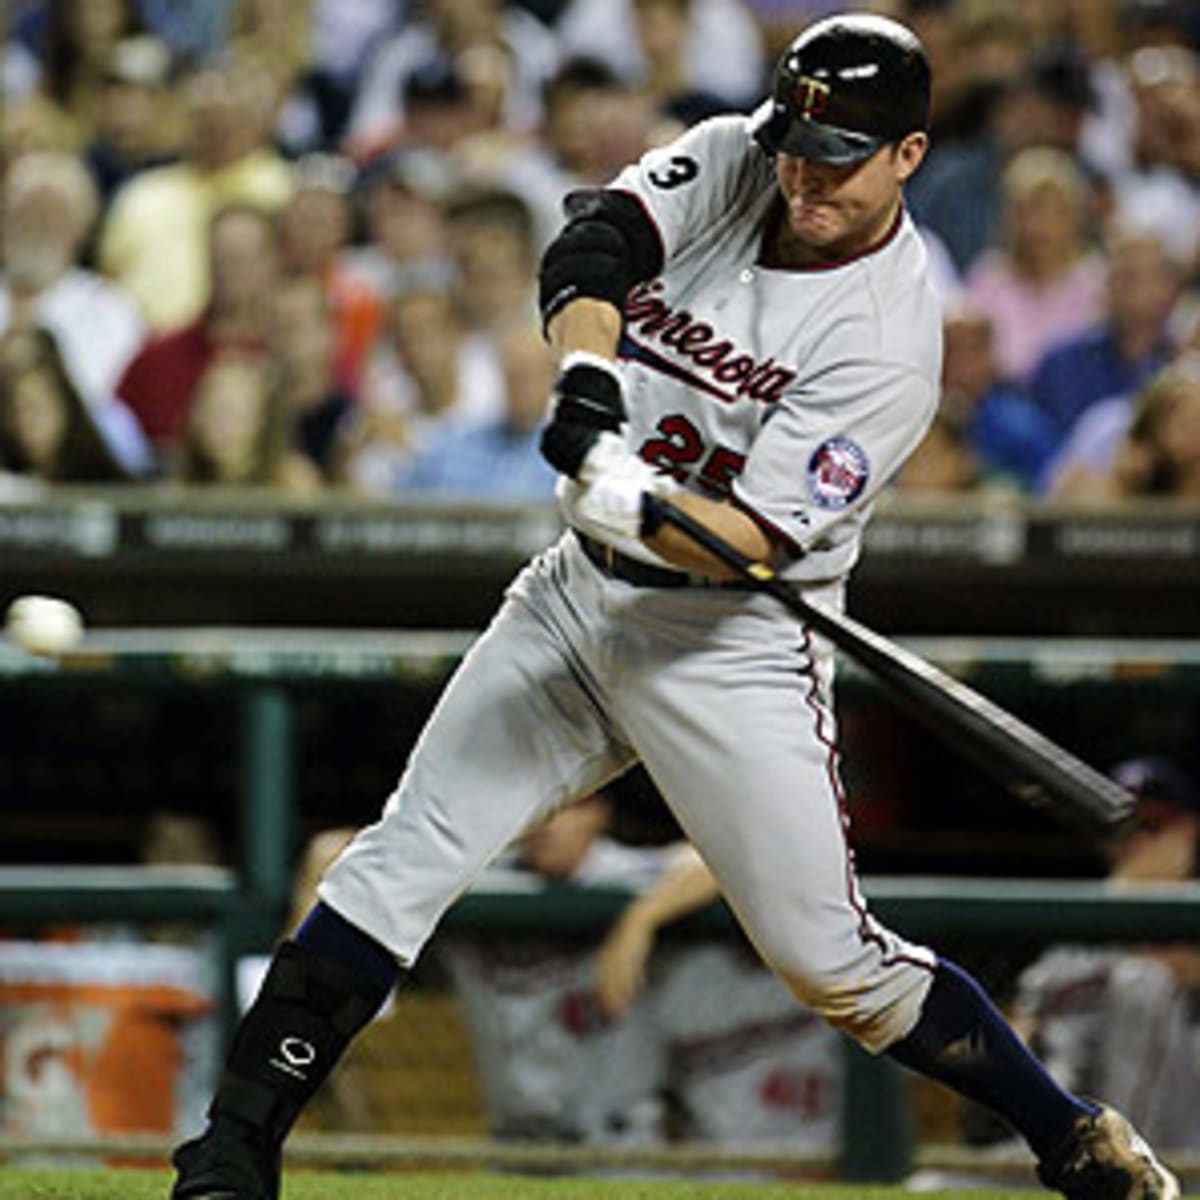 Why White Sox slugger Jim Thome deserves to be a first ballot Hall